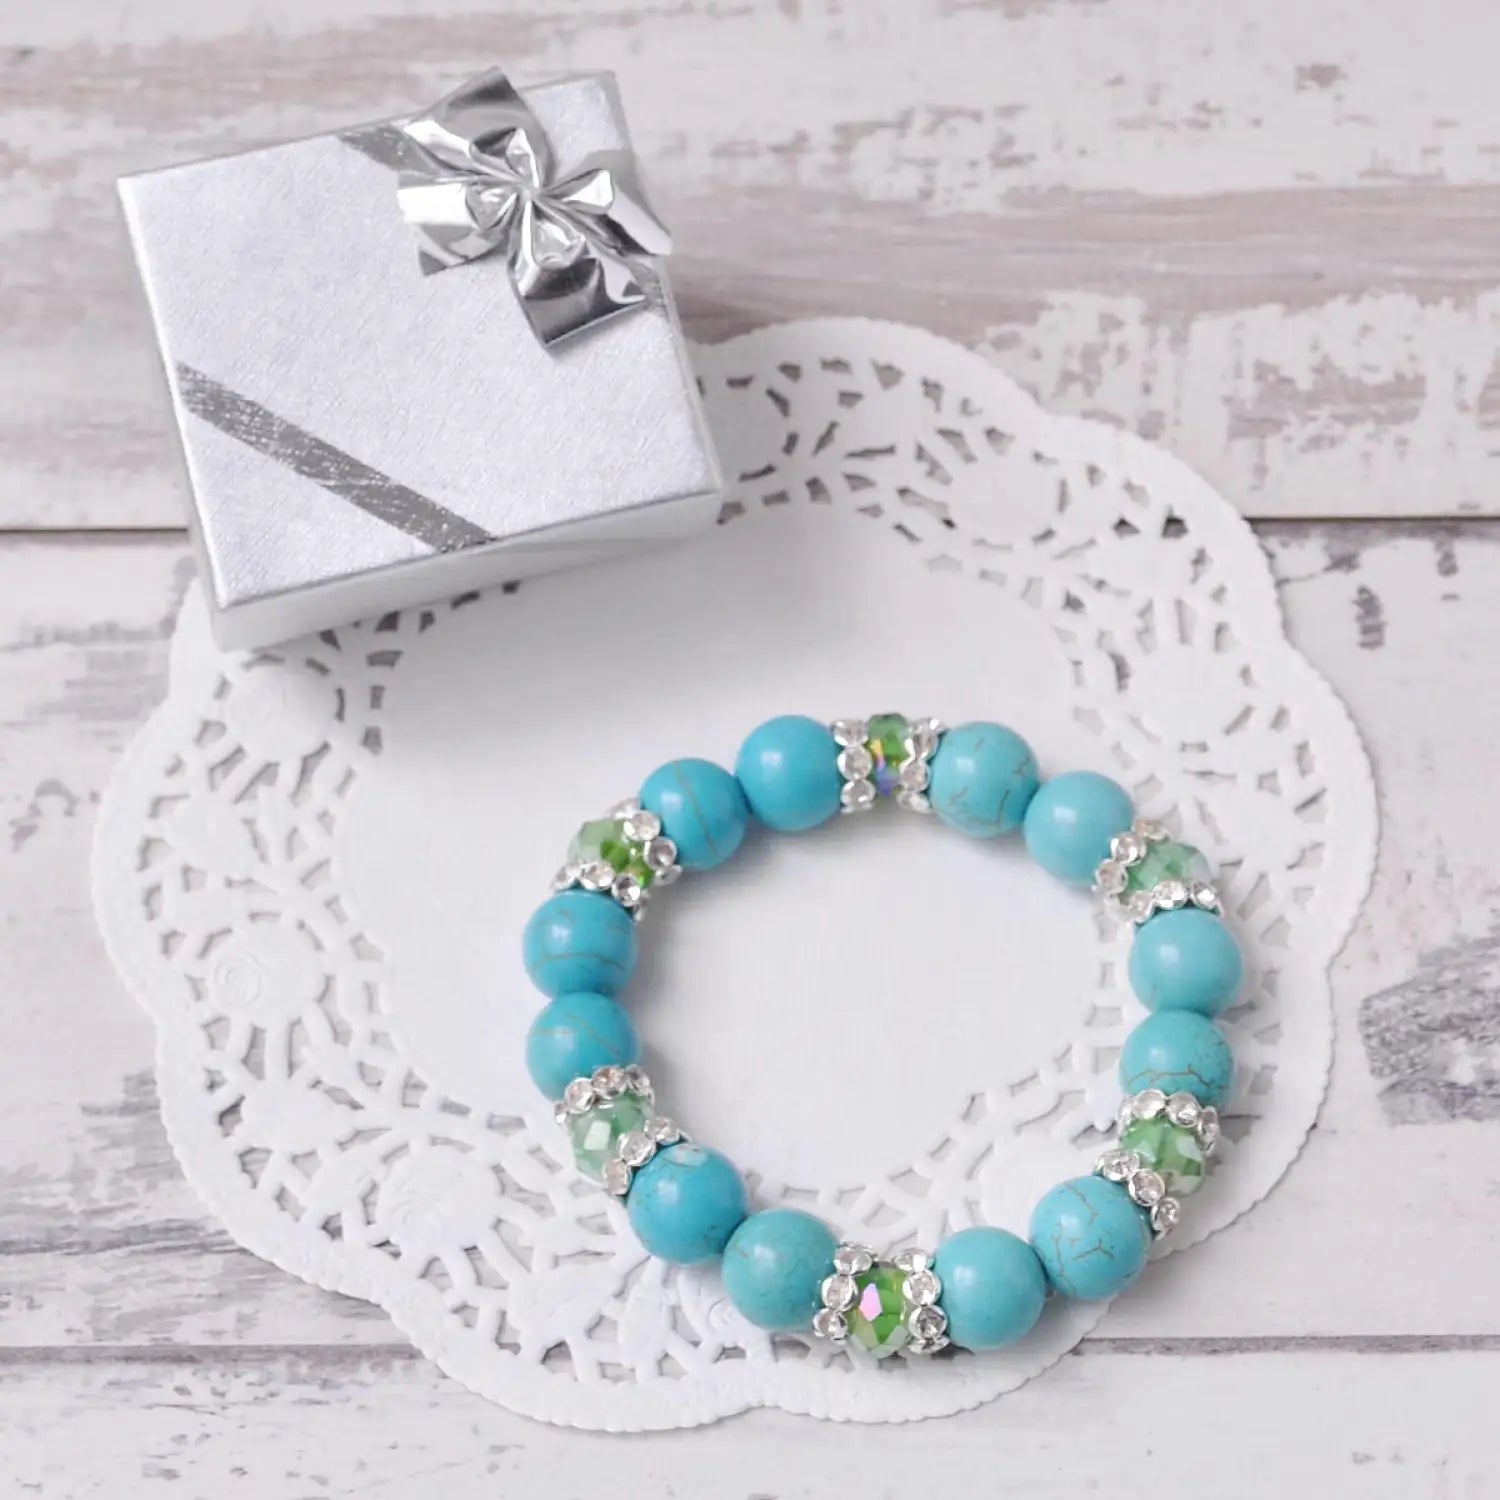 Howlite Turquoise Stone Bracelet with Green Crystals